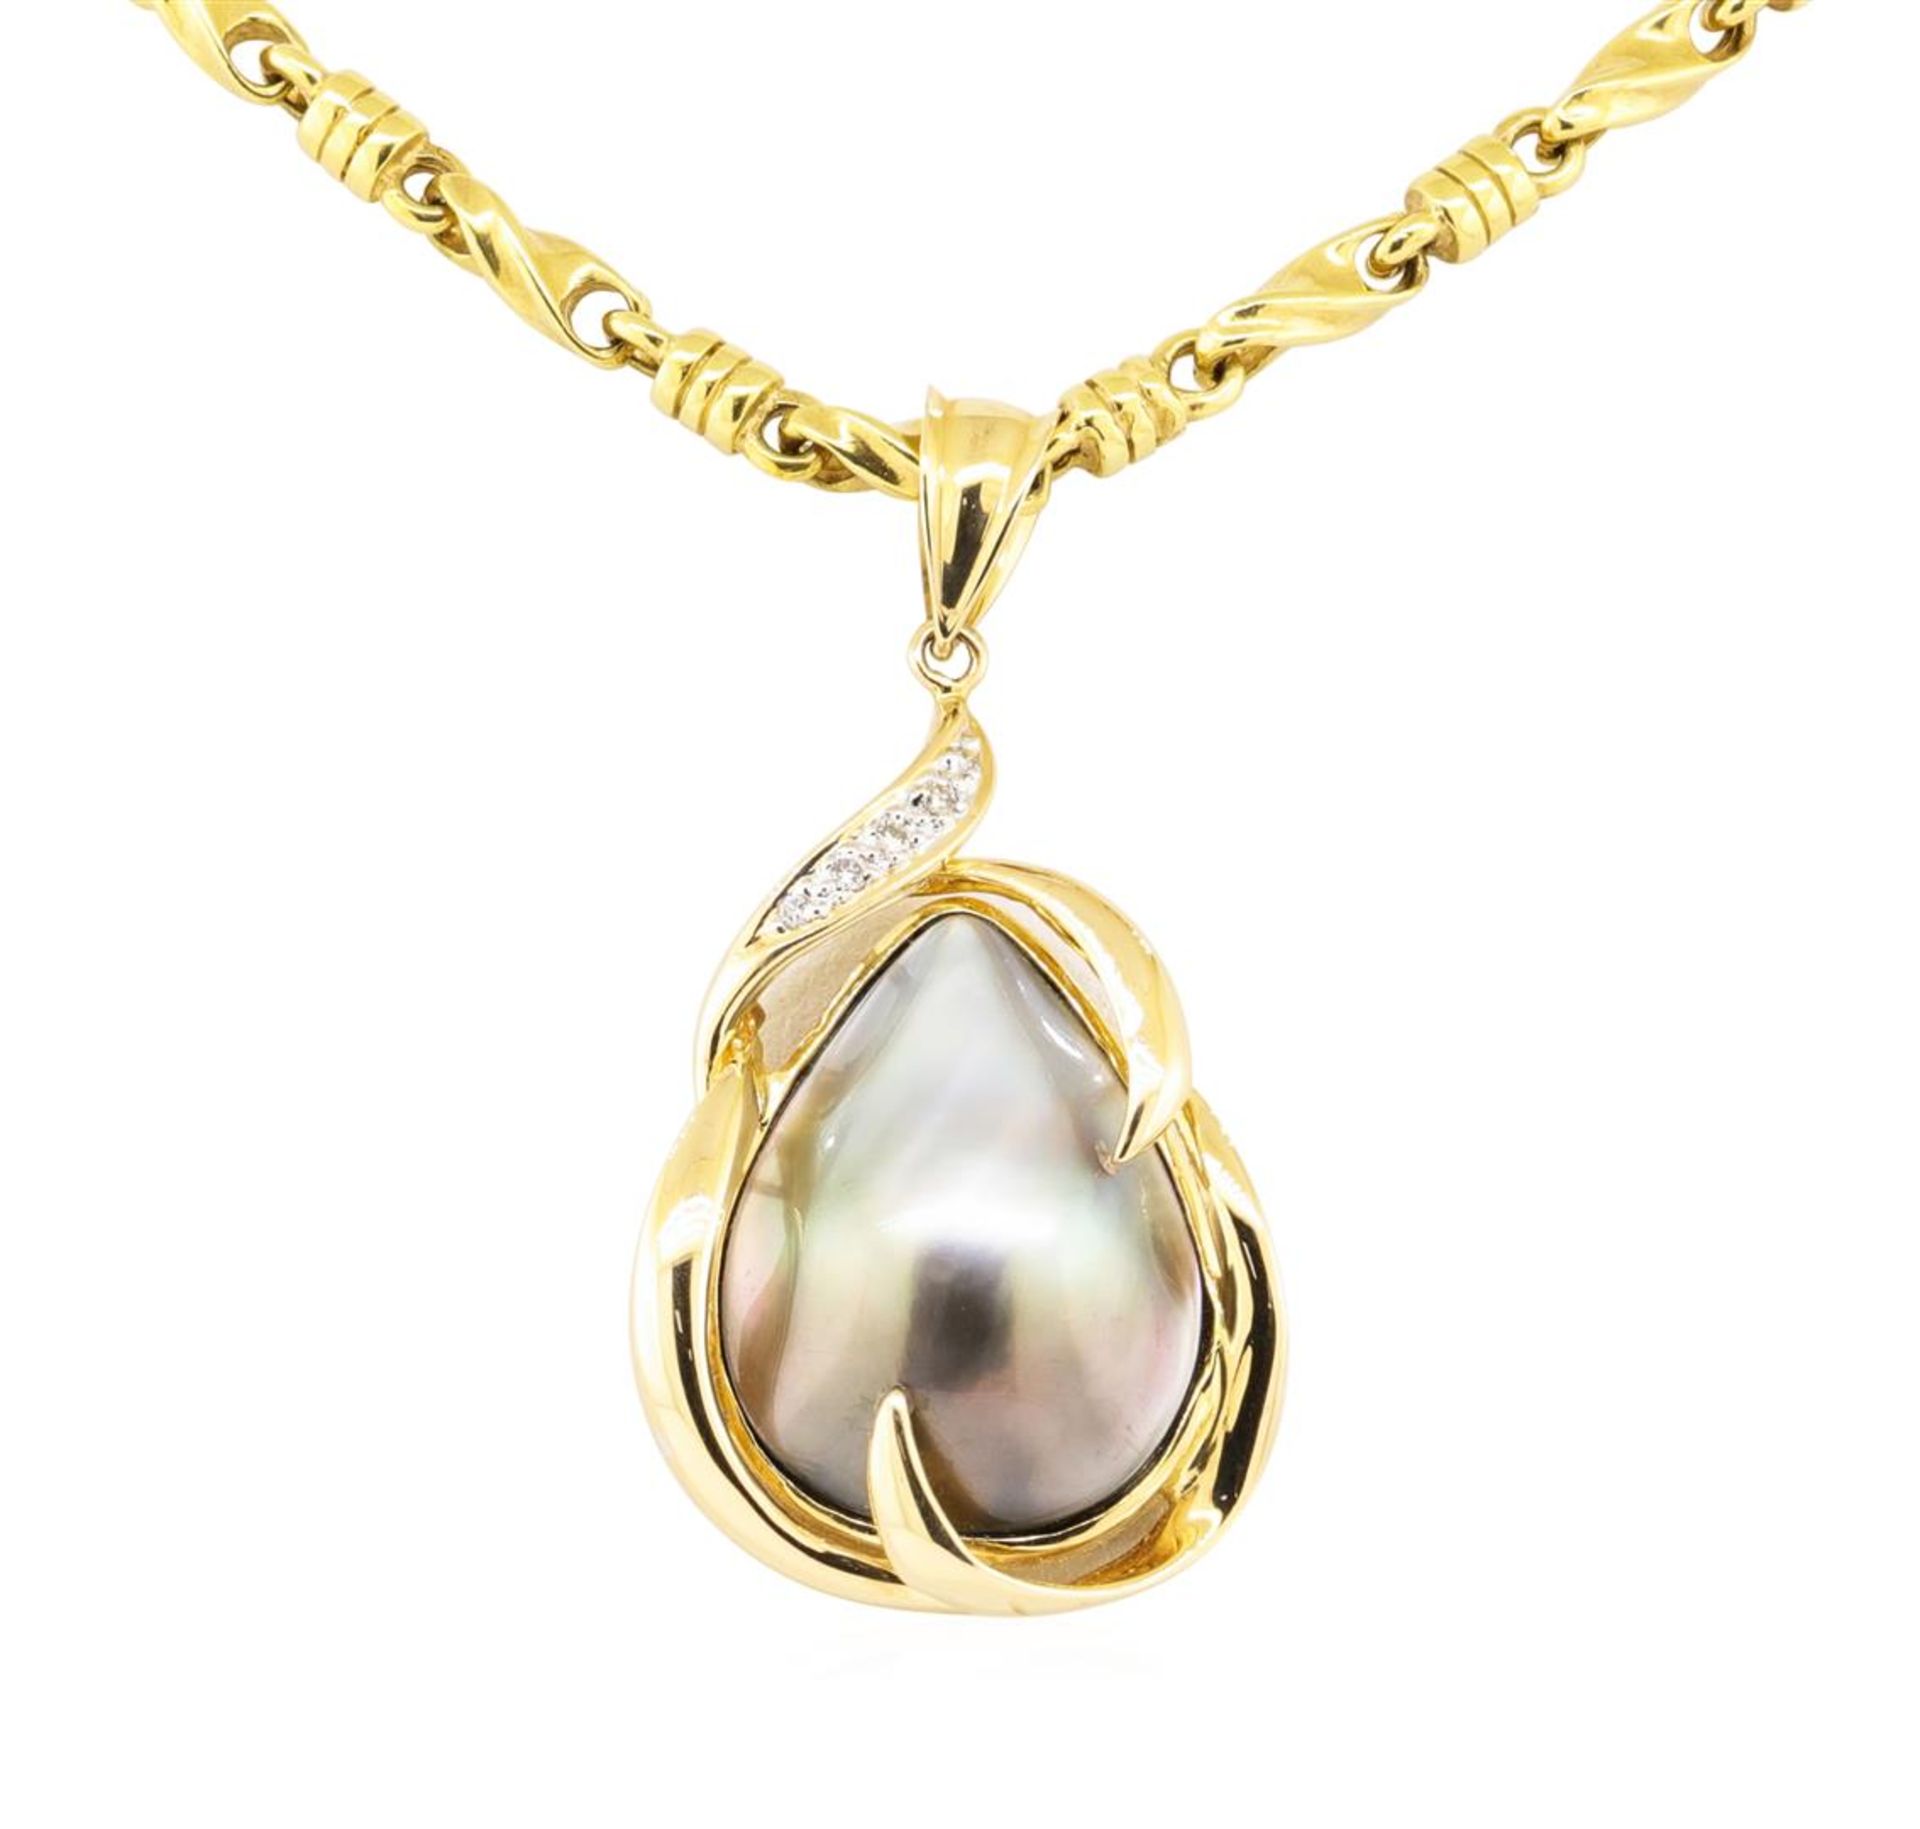 0.04 ctw Diamond and Pearl Pendant & Chain - 14KT Yellow Gold - Image 2 of 3